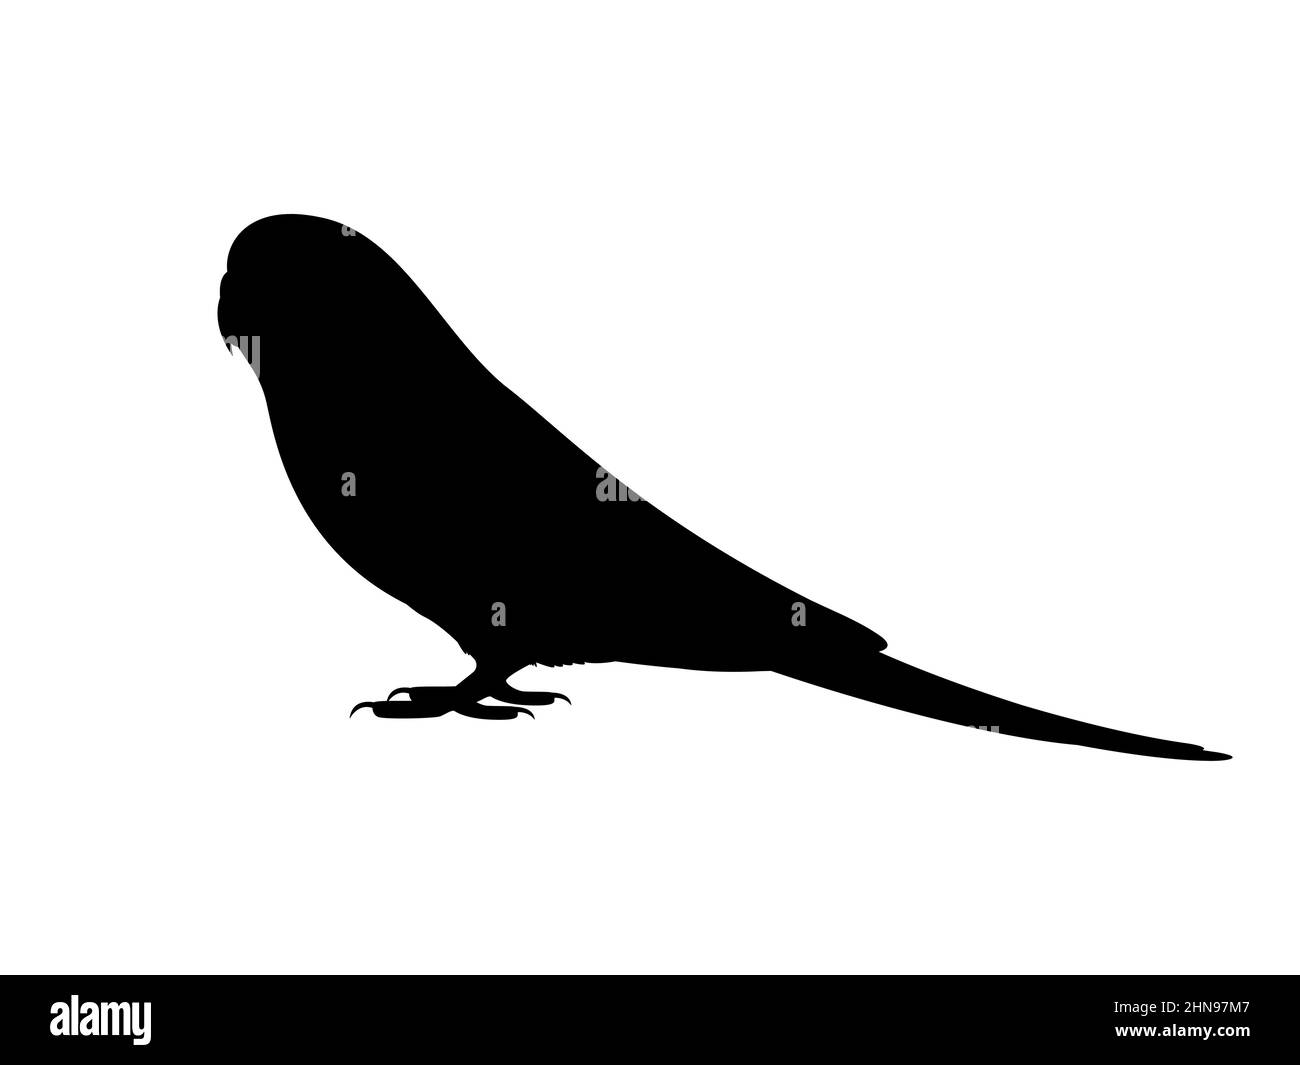 Silhouette of a budgie. Vector illustration of a black silhouette of a budgerigar parrot isolated on a white background. Side view, logo, icon. Stock Vector